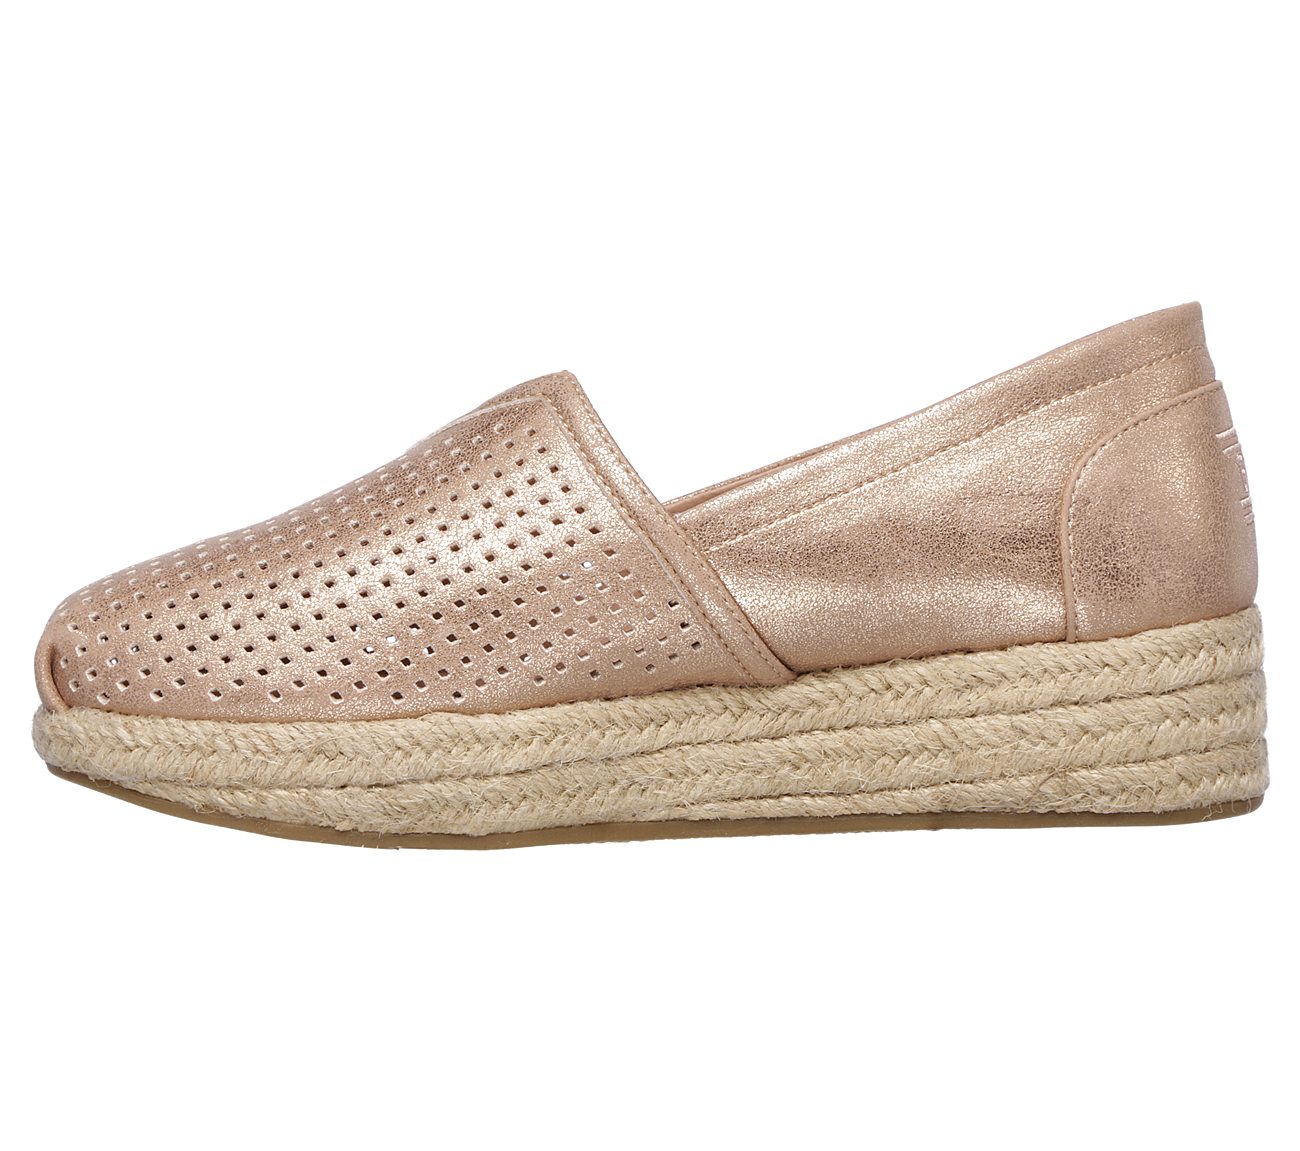 bobs wedges by skechers